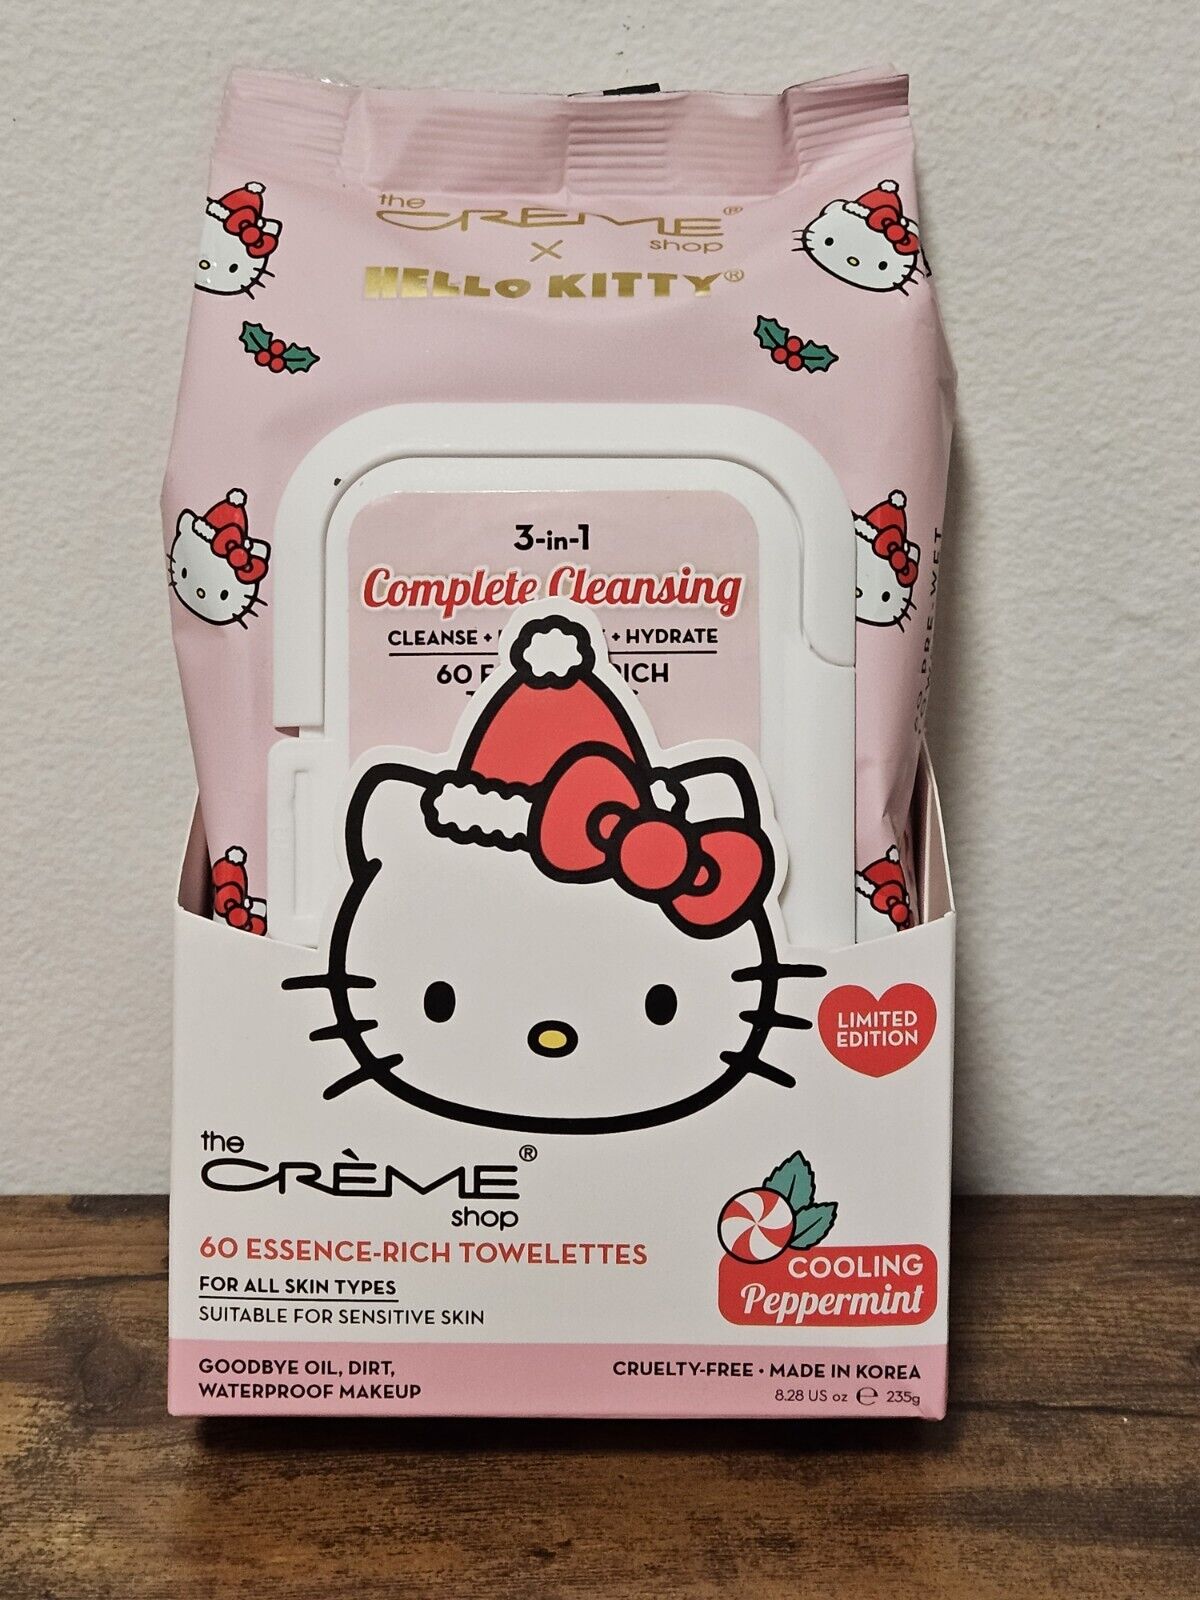 NWT The Crème Shop Hello Kitty Complete Cleansing Towelettes Cooling Peppermint